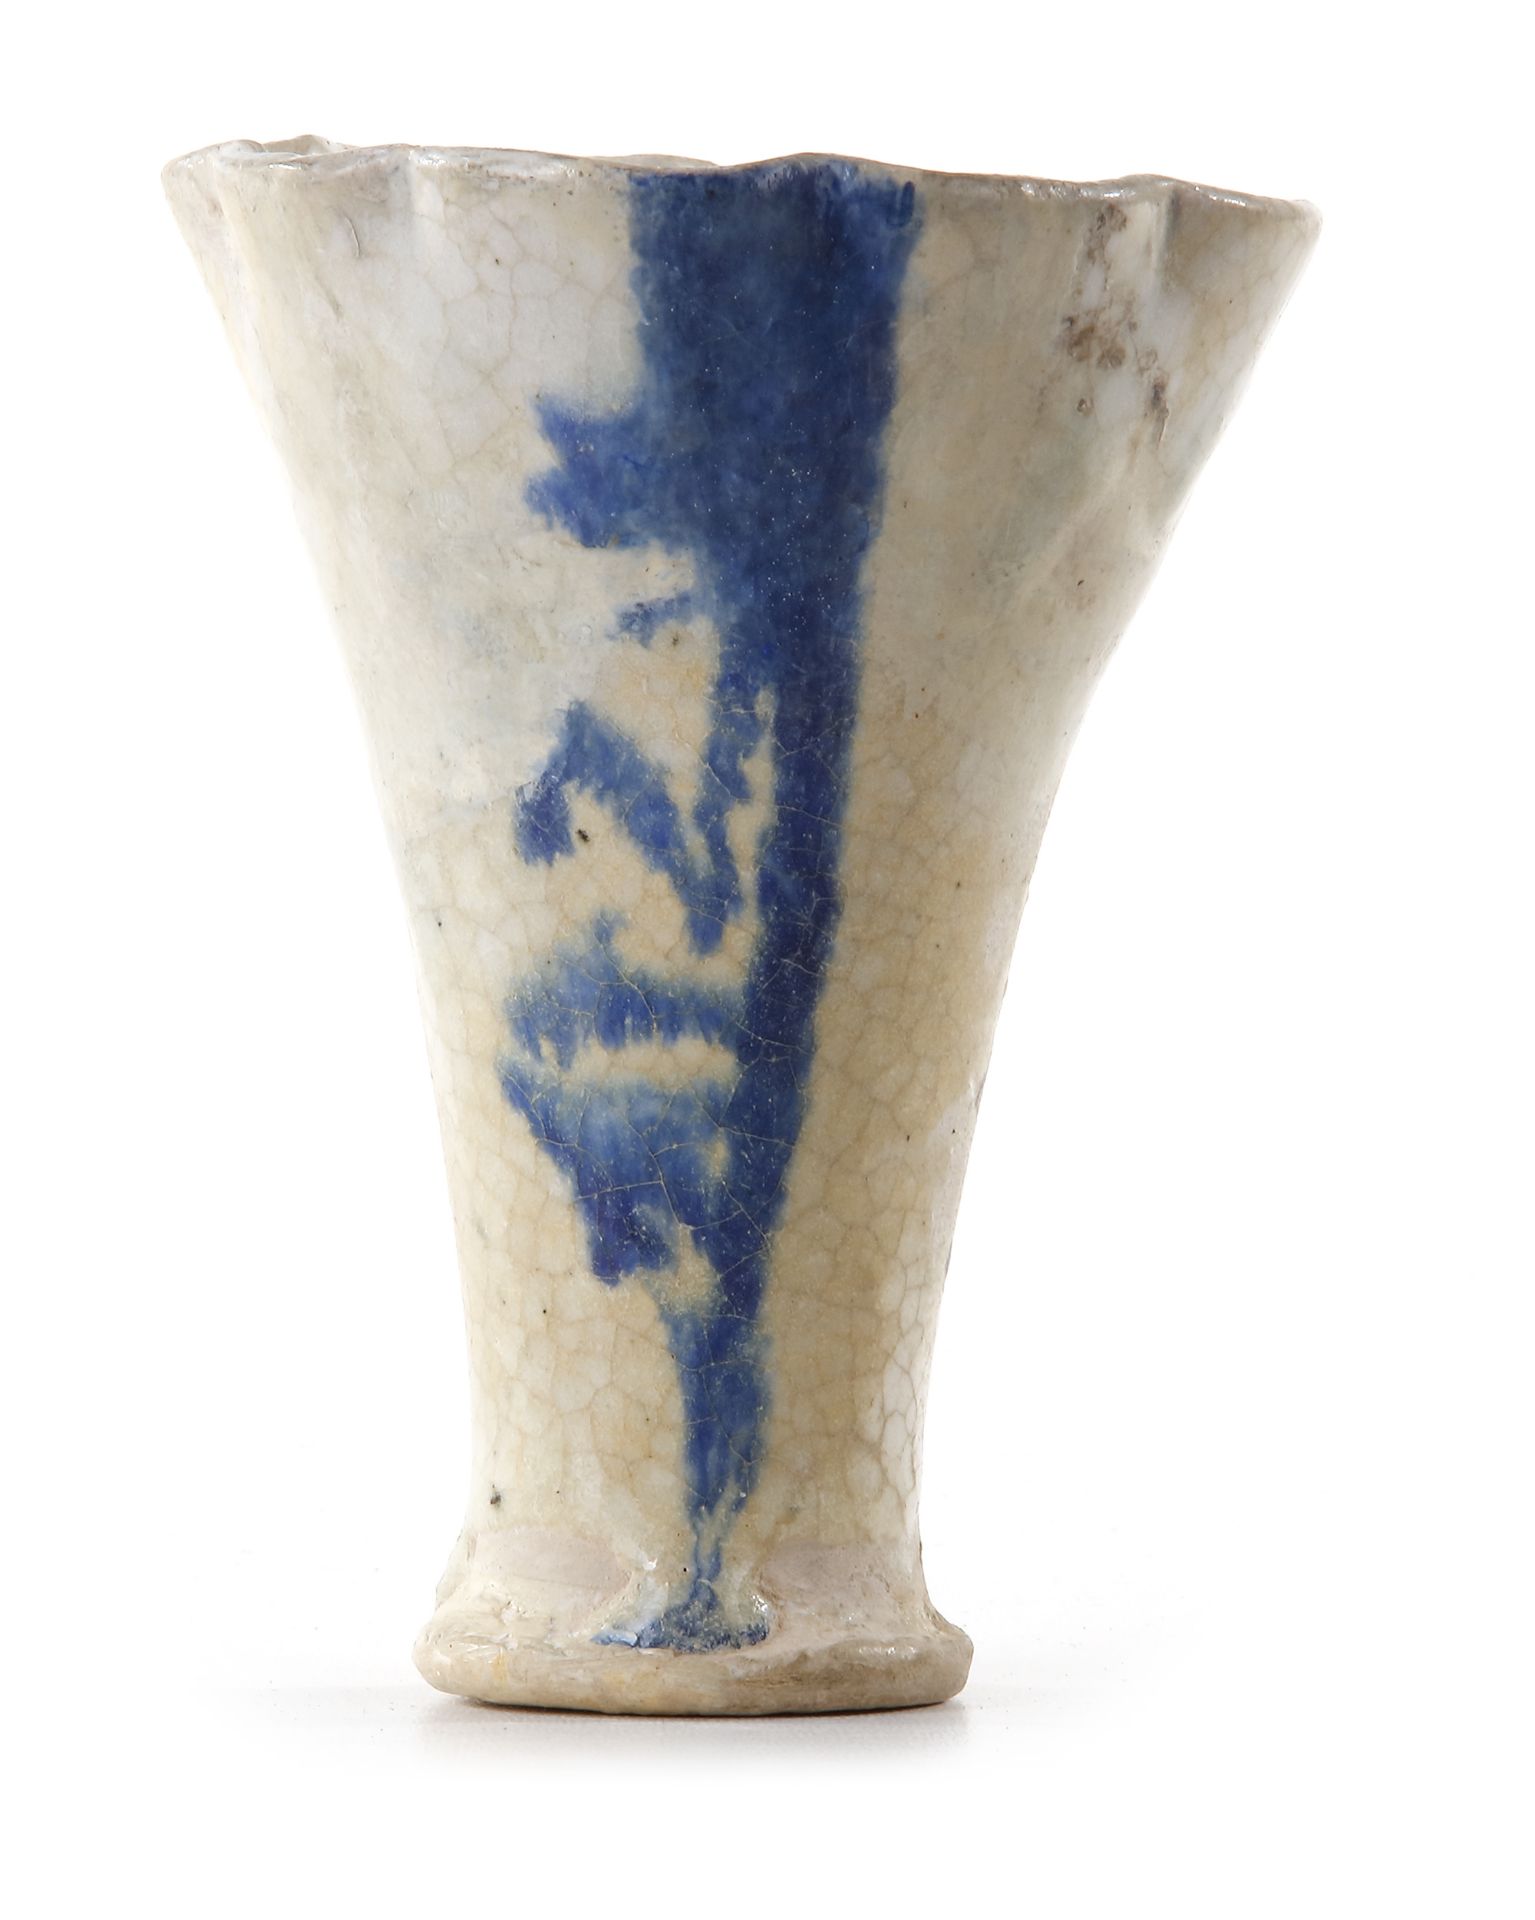 AN ABBASID CALLIGRAPHIC POTTERY CUP, MESOPOTAMIA, 9TH CENTURY - Image 3 of 8